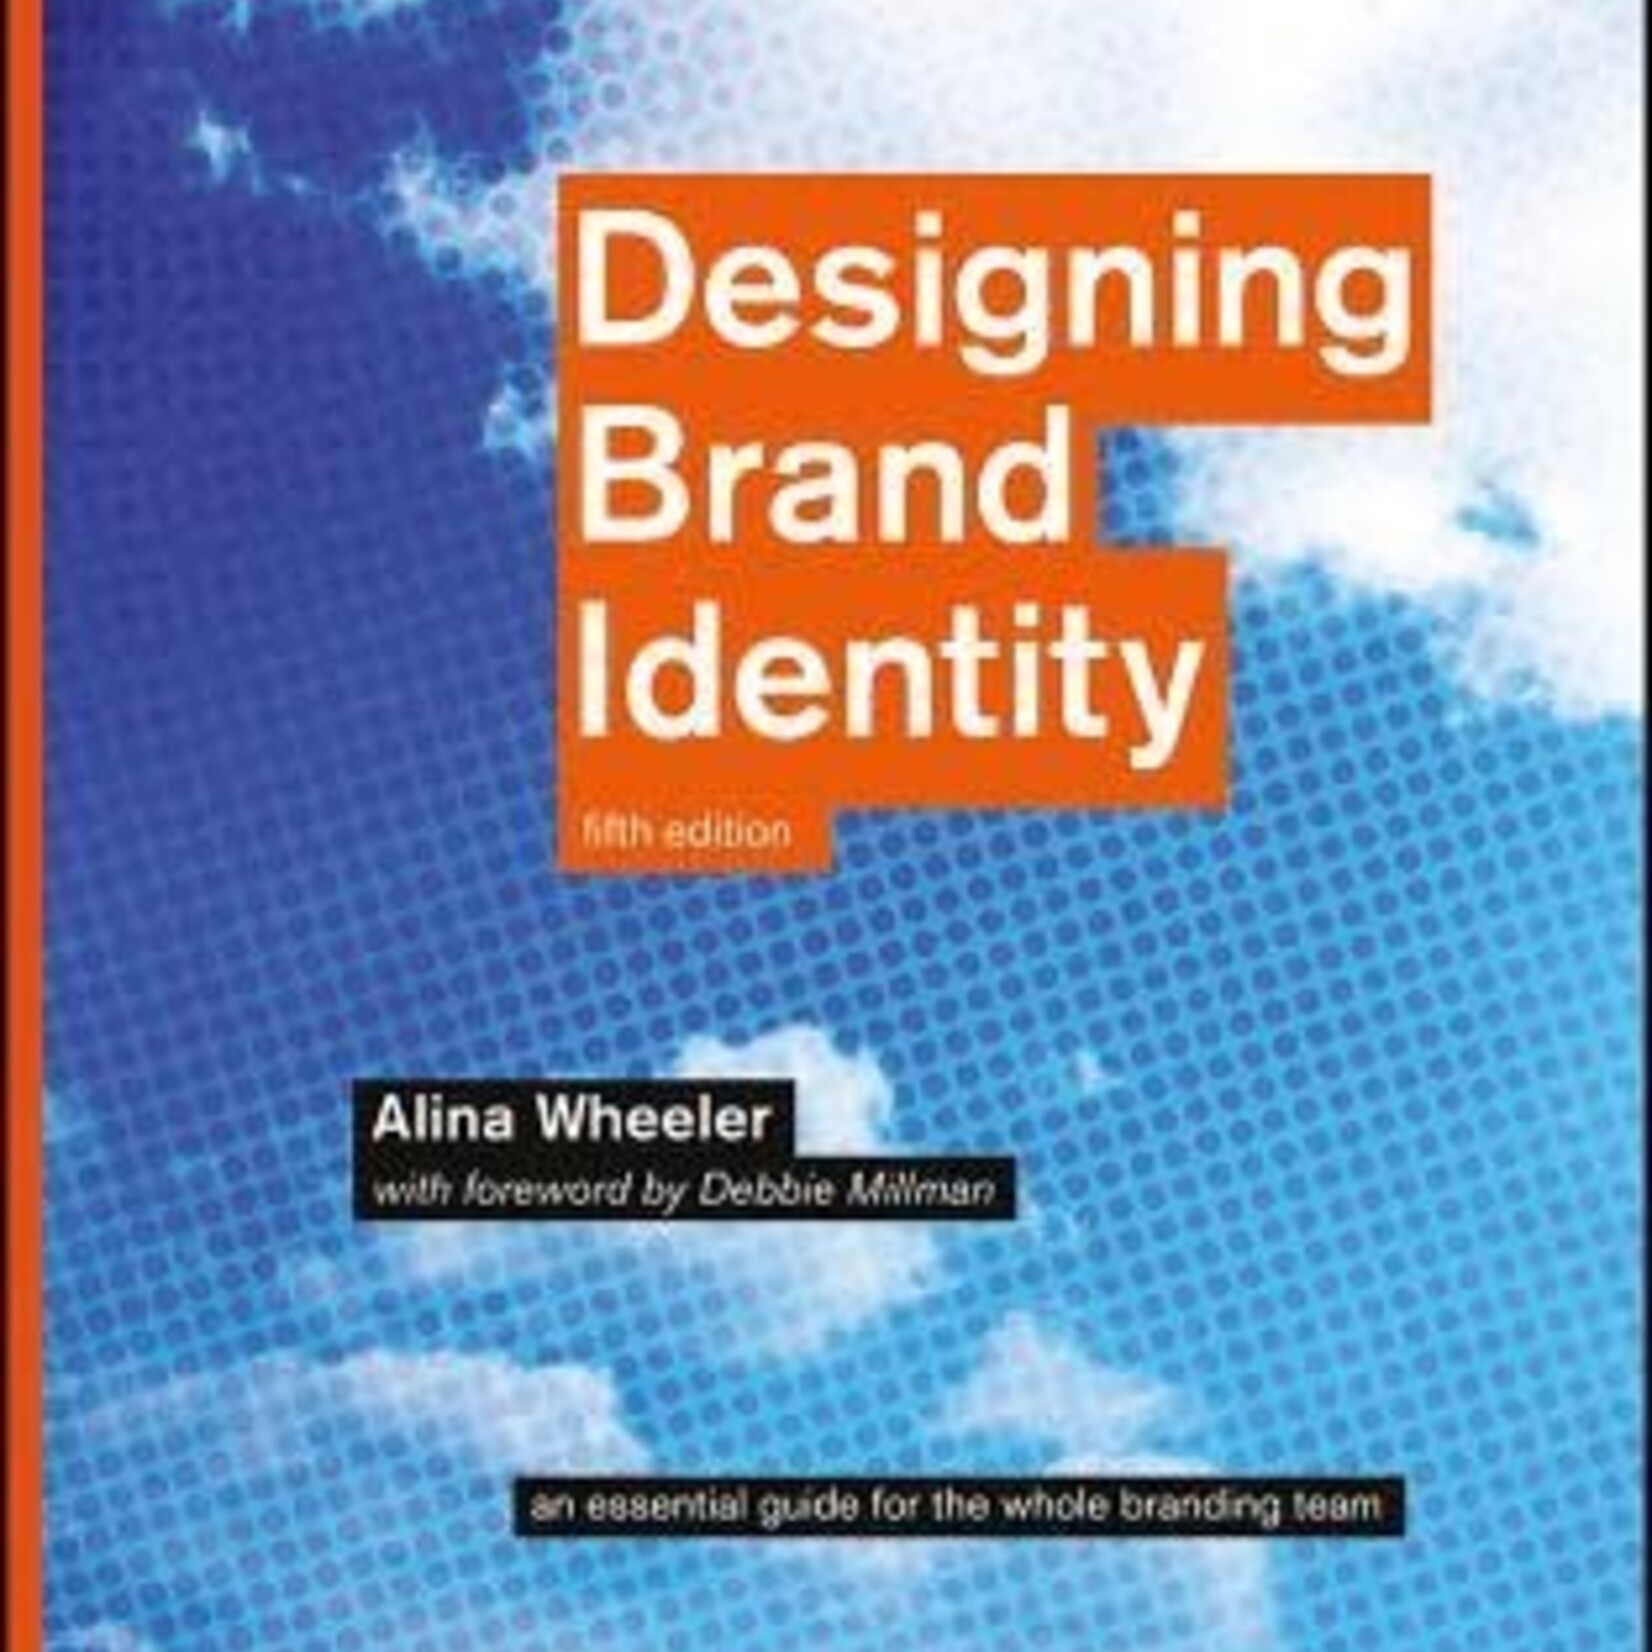 Designing Brand Identity: An Essential Guide for the Whole Branding Team, 5th edition